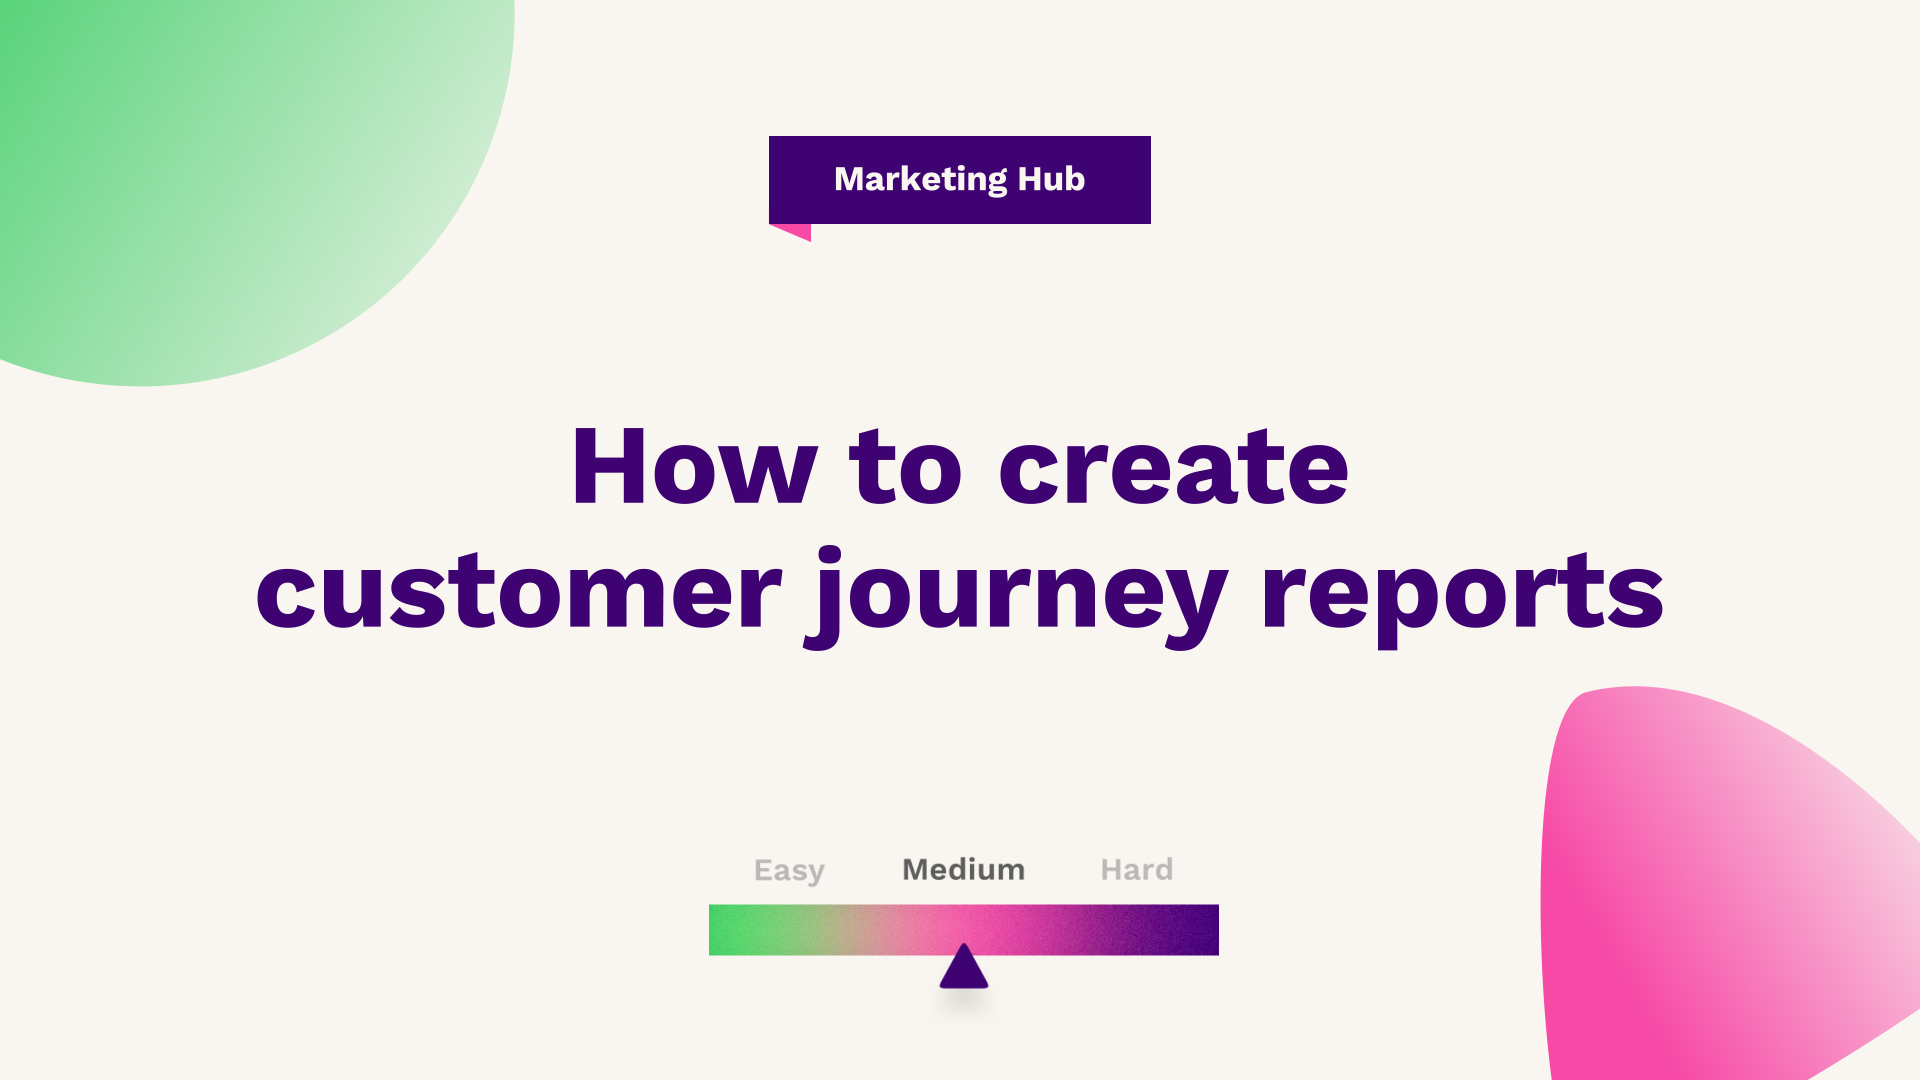 How to create customer journey reports